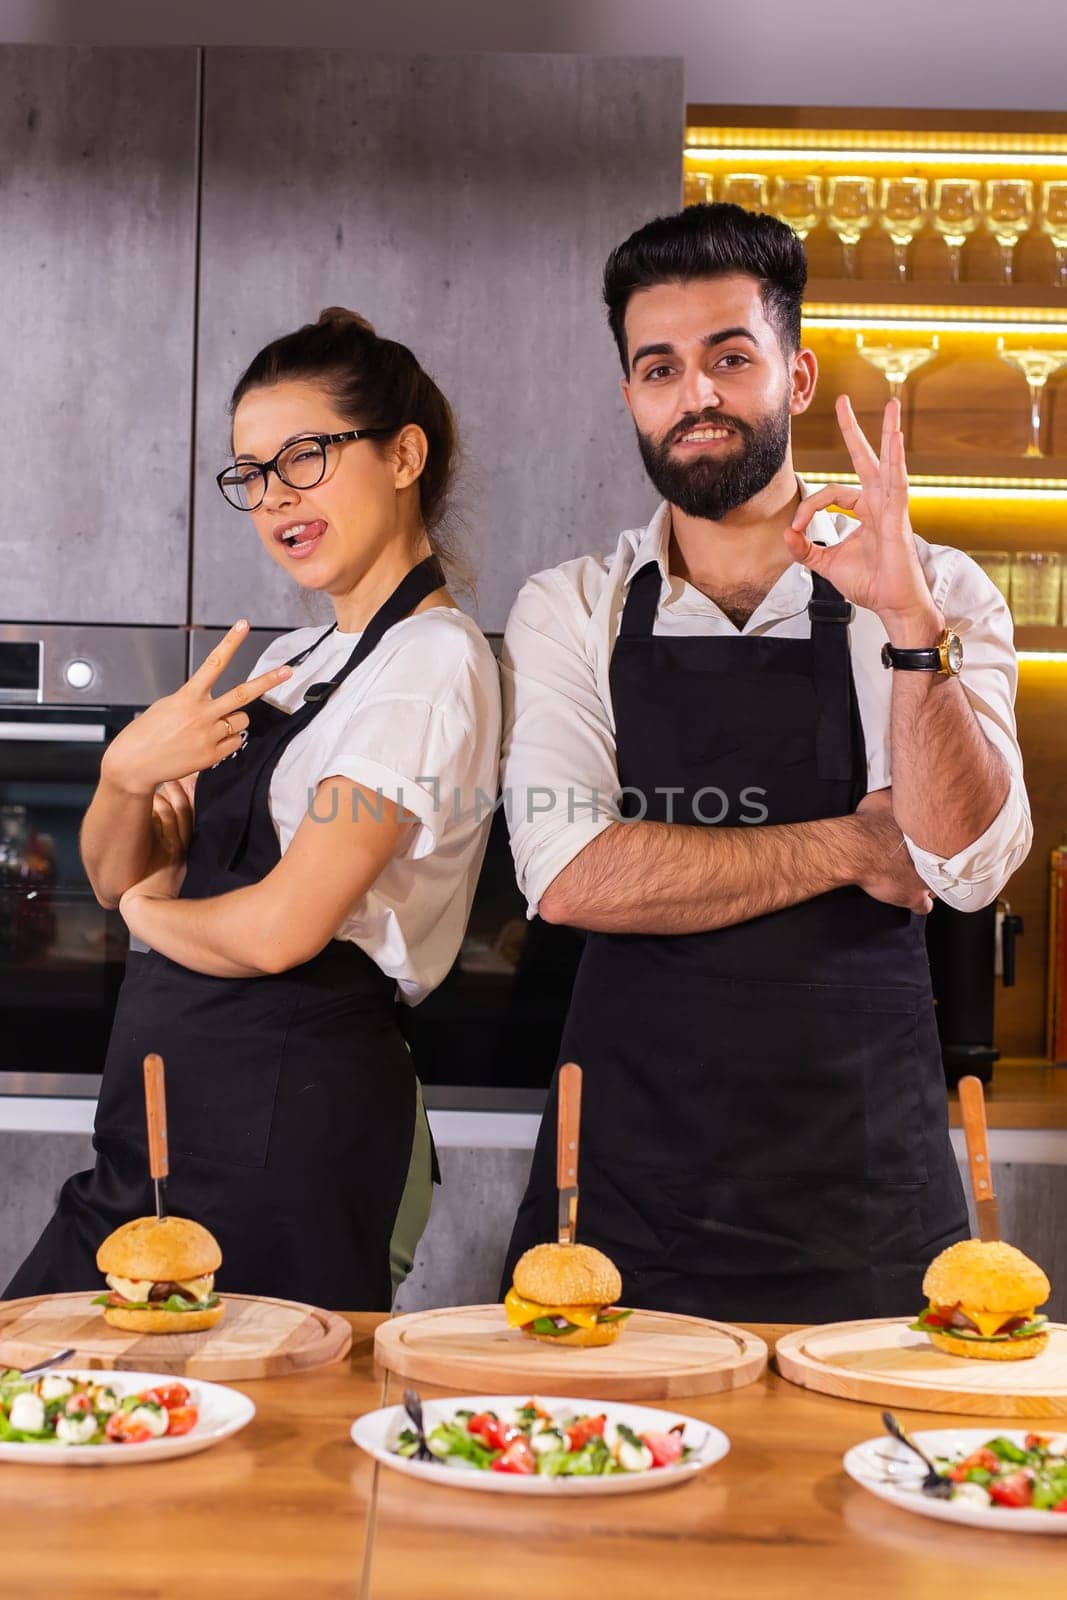 Happy chef and his colleague standing at kitchen and looking at camera - food and restaurant